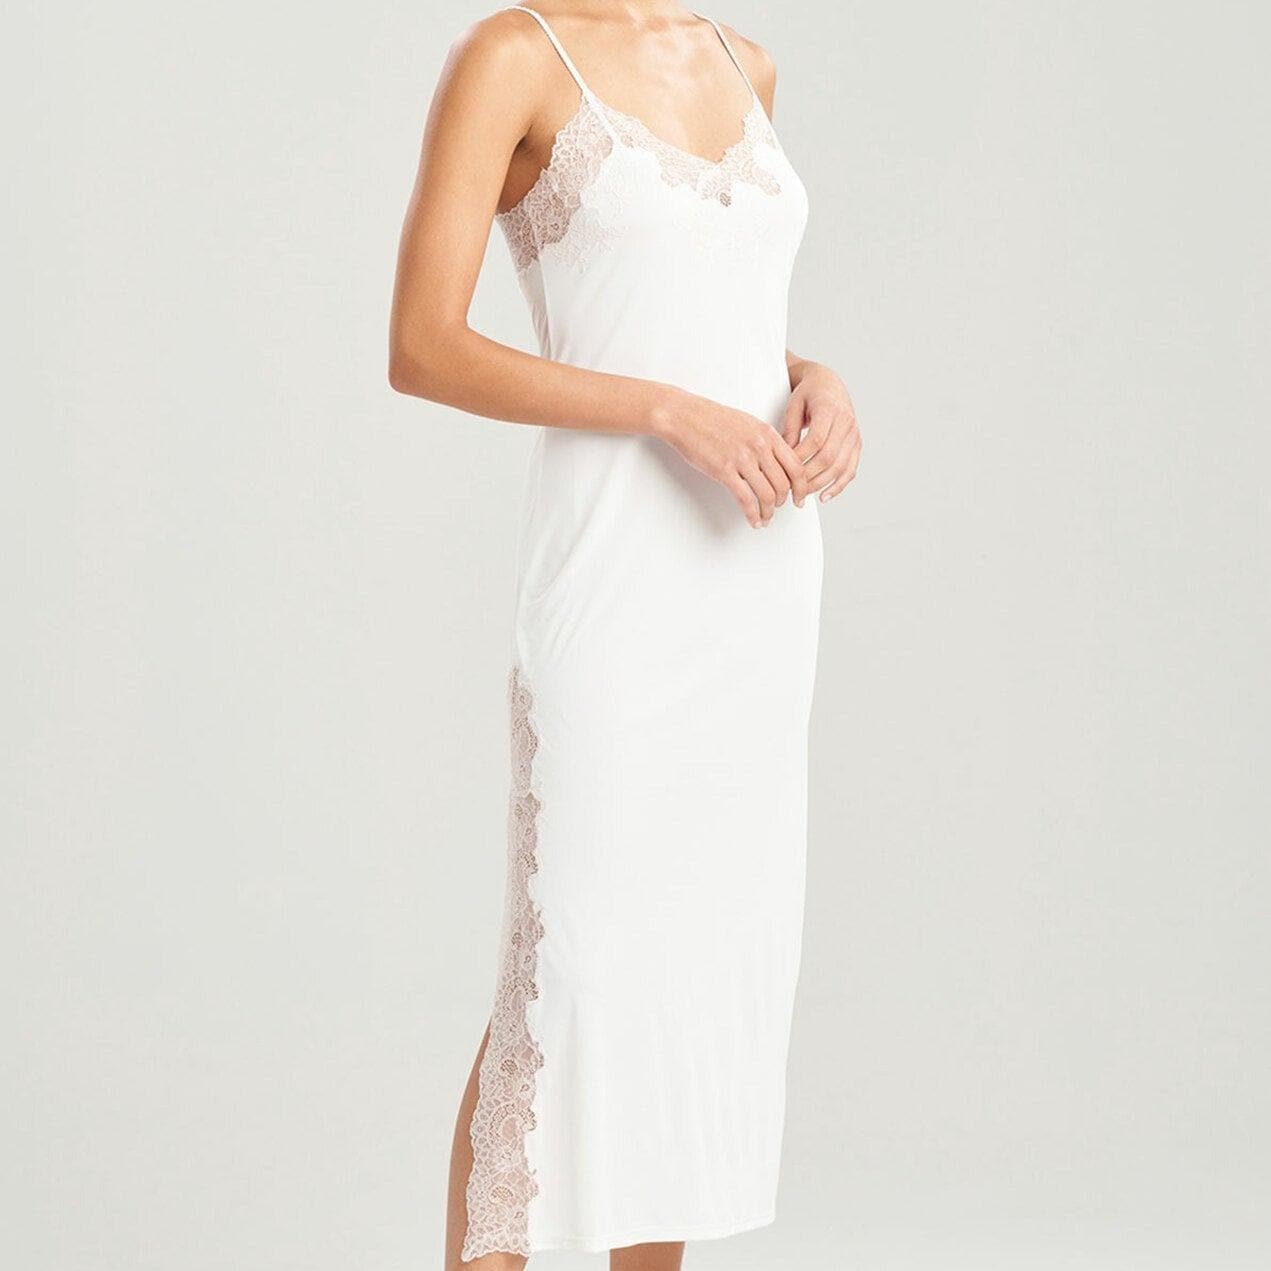 Natori Enchant Lace Slit Gown in Ivory / Pink Lace P73012-Loungewear-Natori-Ivory / Pink Lace-XSmall-Anna Bella Fine Lingerie, Reveal Your Most Gorgeous Self!